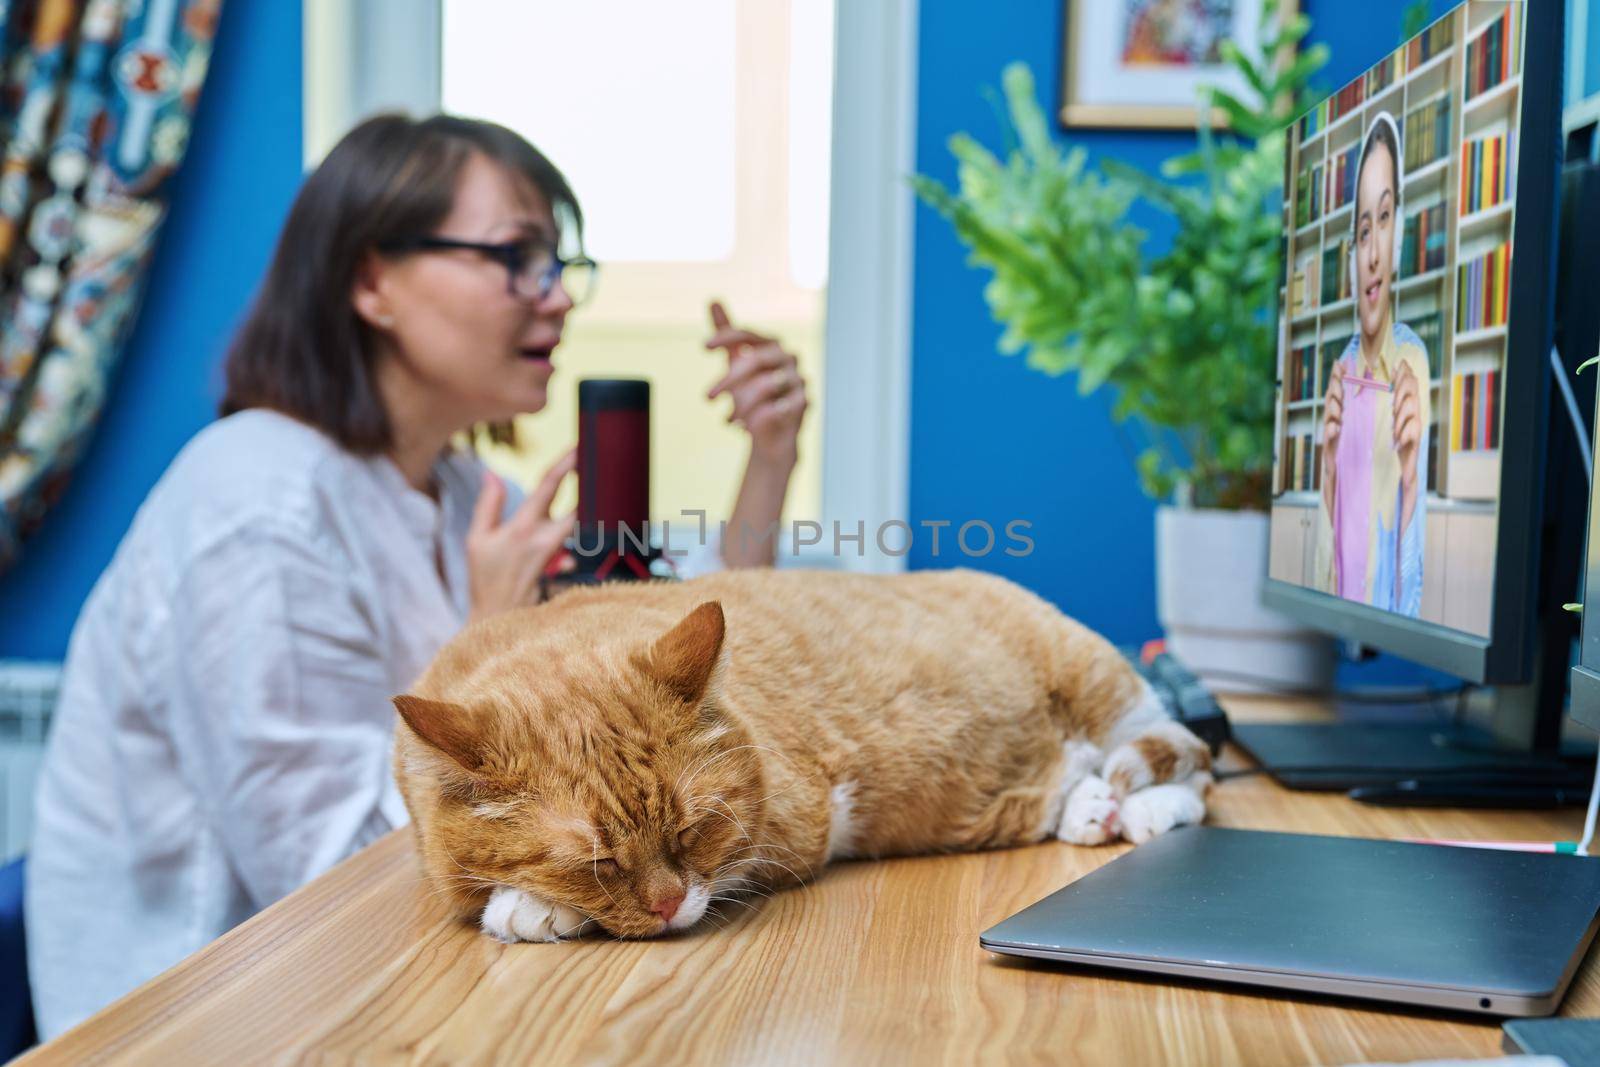 Cat sleeping on desk in home office, woman making video call by VH-studio